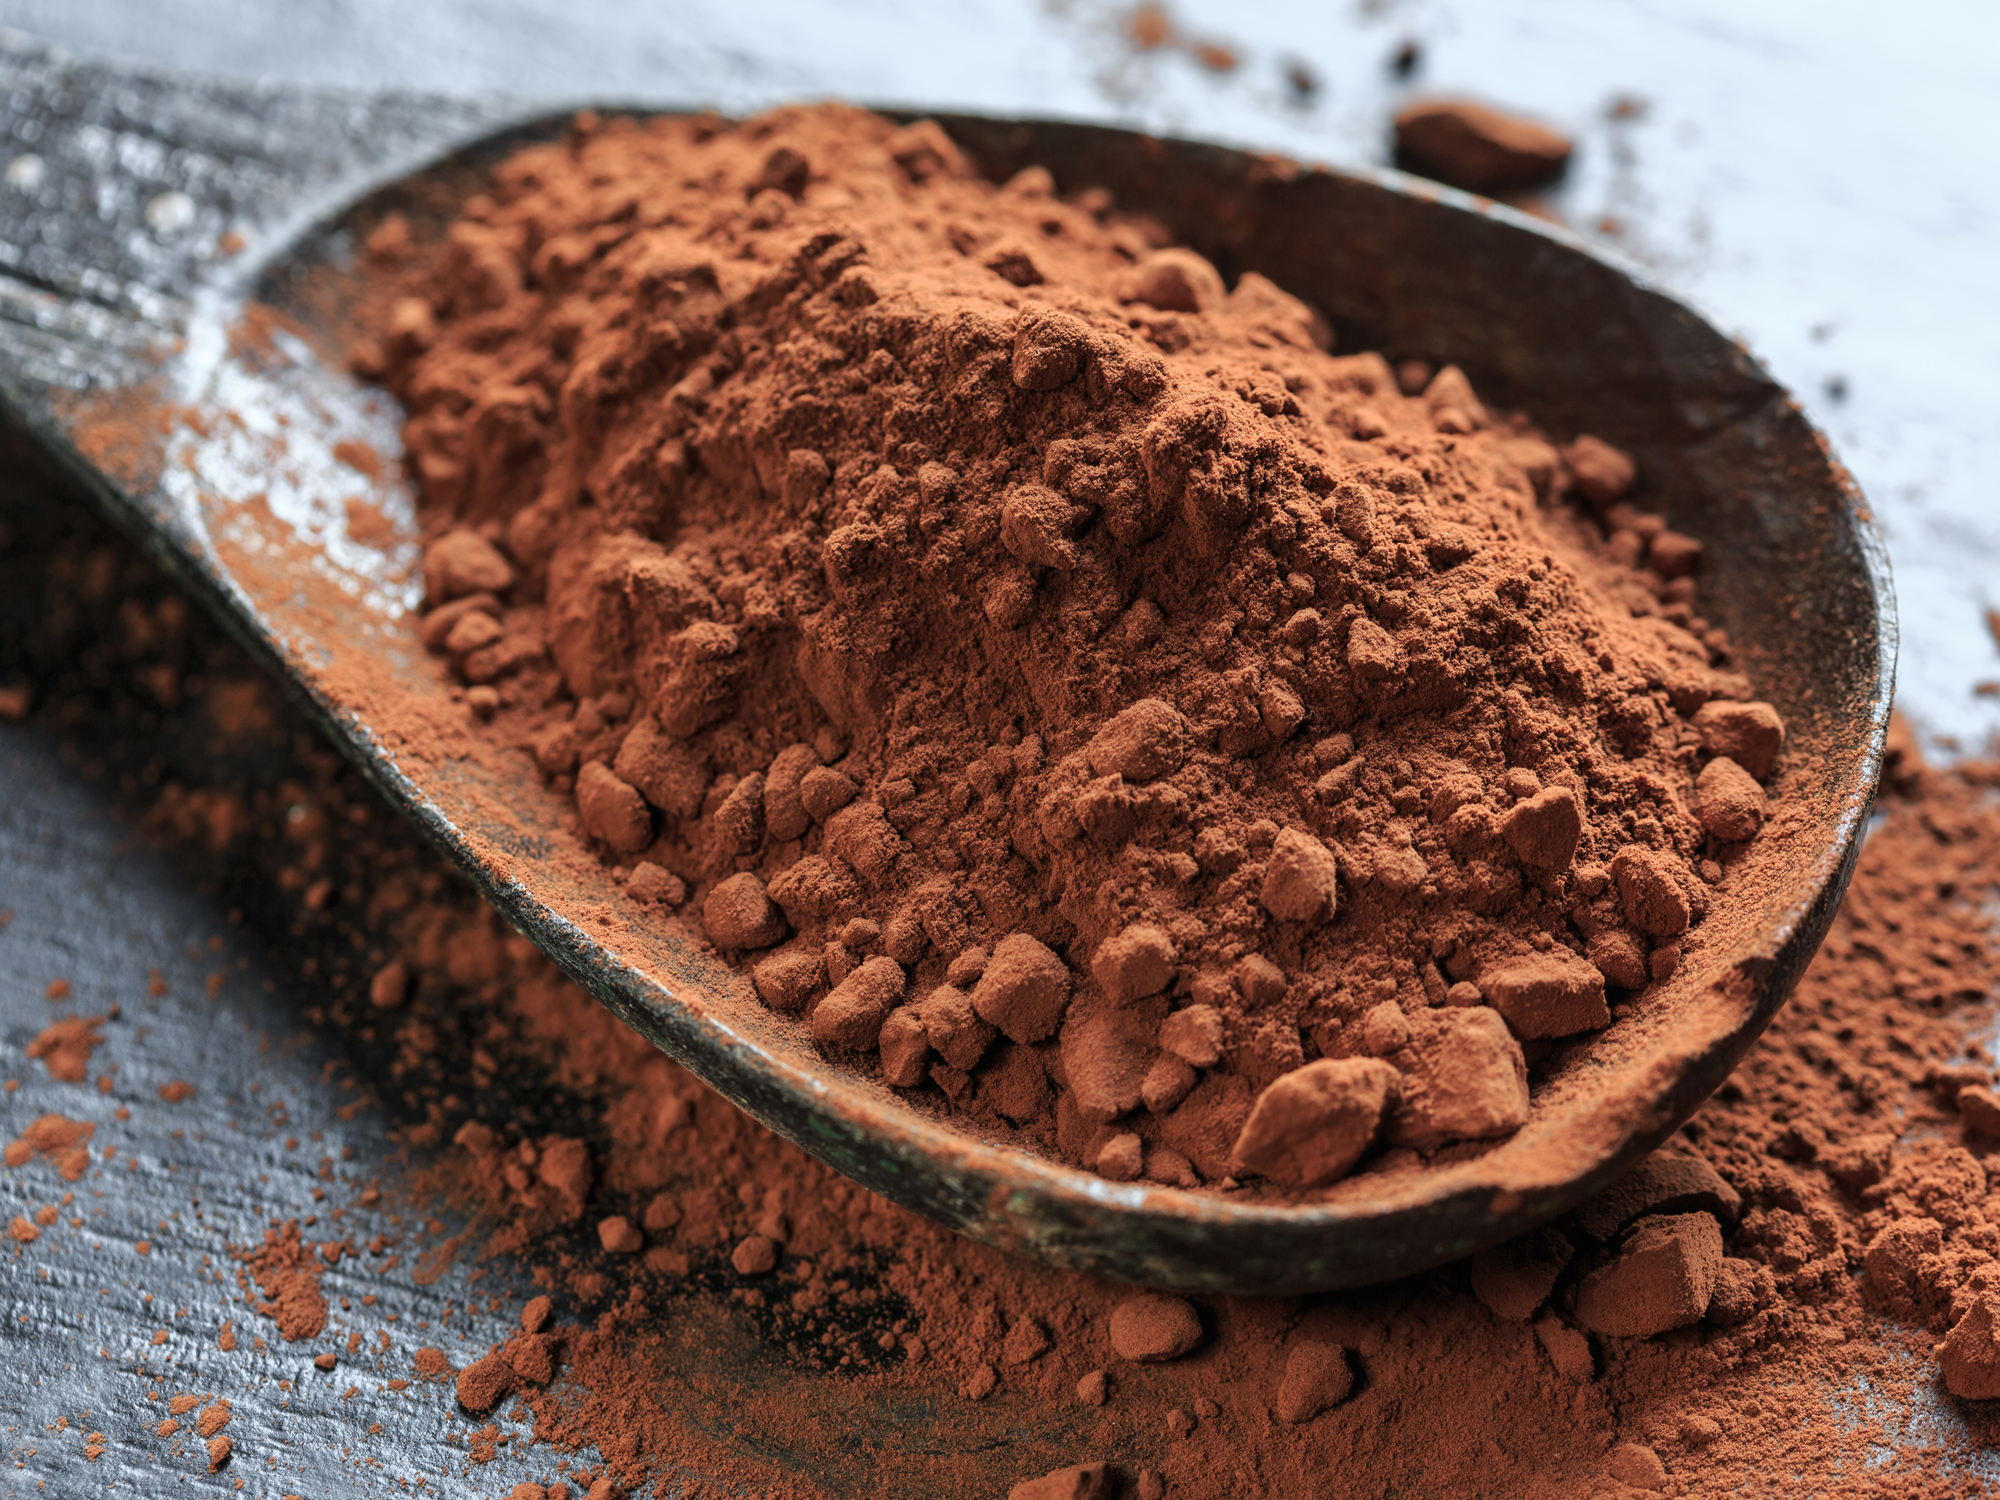 How much cocoa does it take to lessen heart attack and stroke risk?